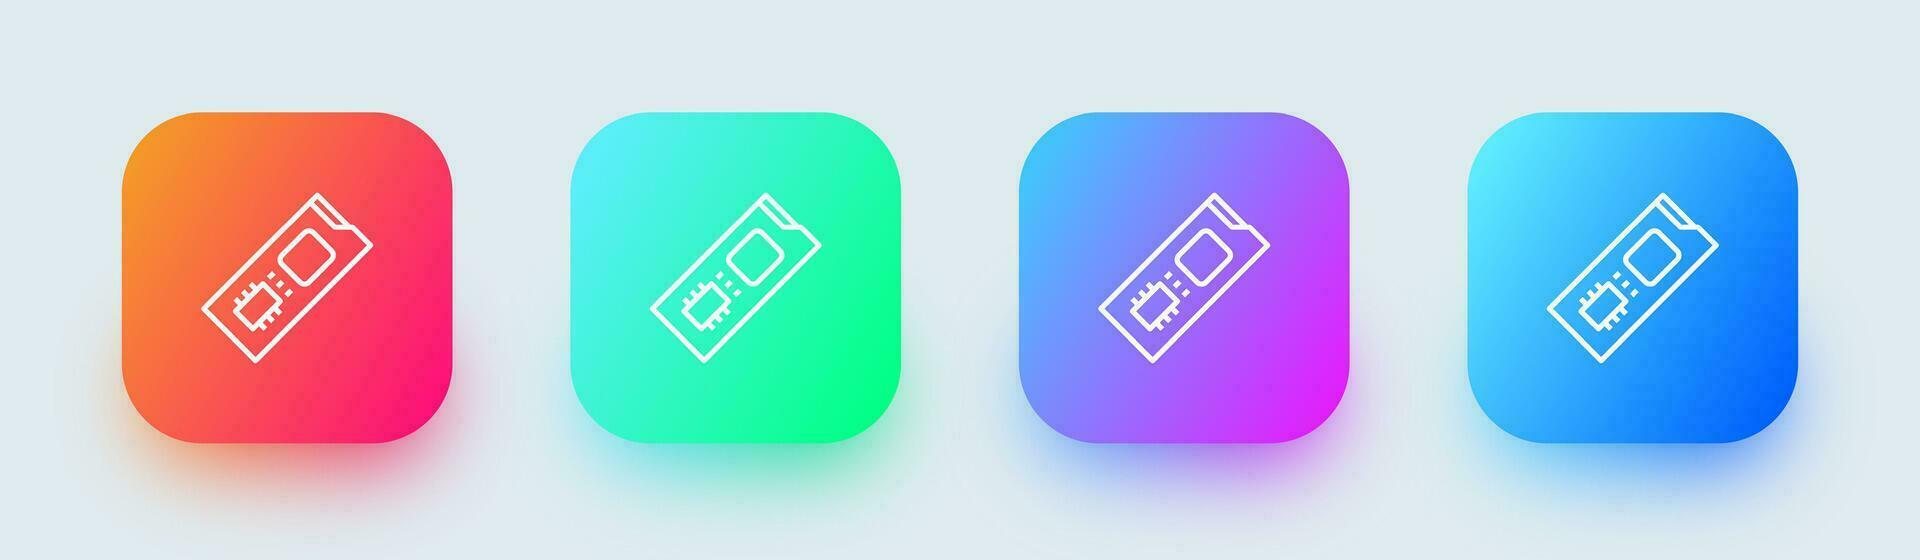 Ssd line icon in square gradient colors. Drive signs vector illustration.